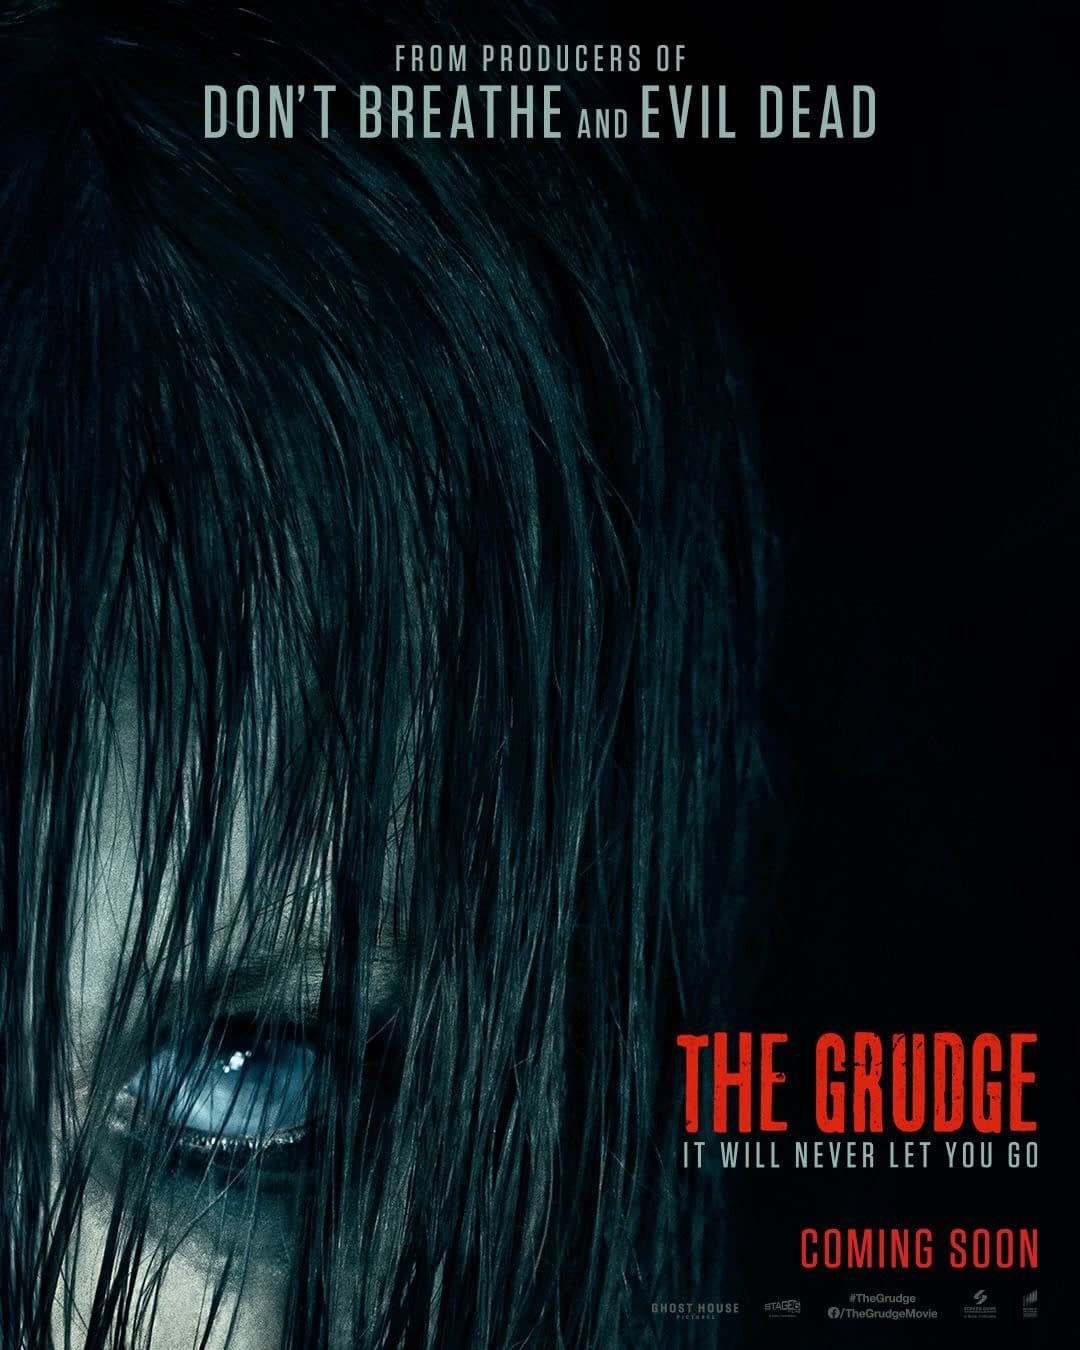 "The Grudge" Stays True to Kayako in New Poster